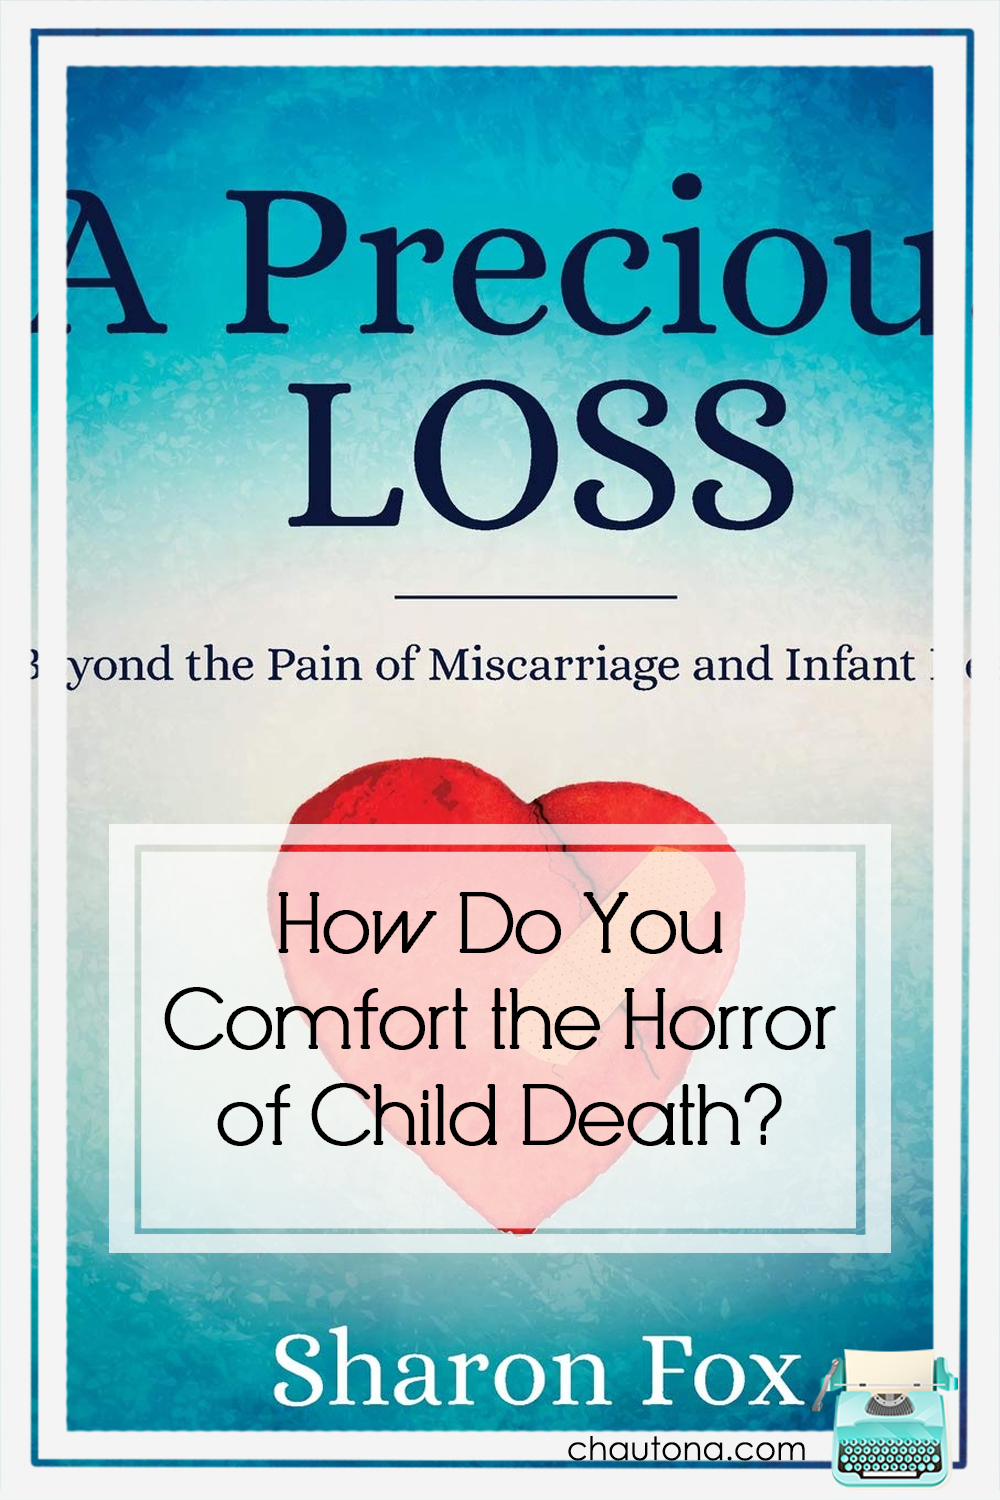 A Precious Loss tackles a tough topic in the attempt to encourage parents after the loss of a child. But does it provide what parents need most? via @chautonahavig